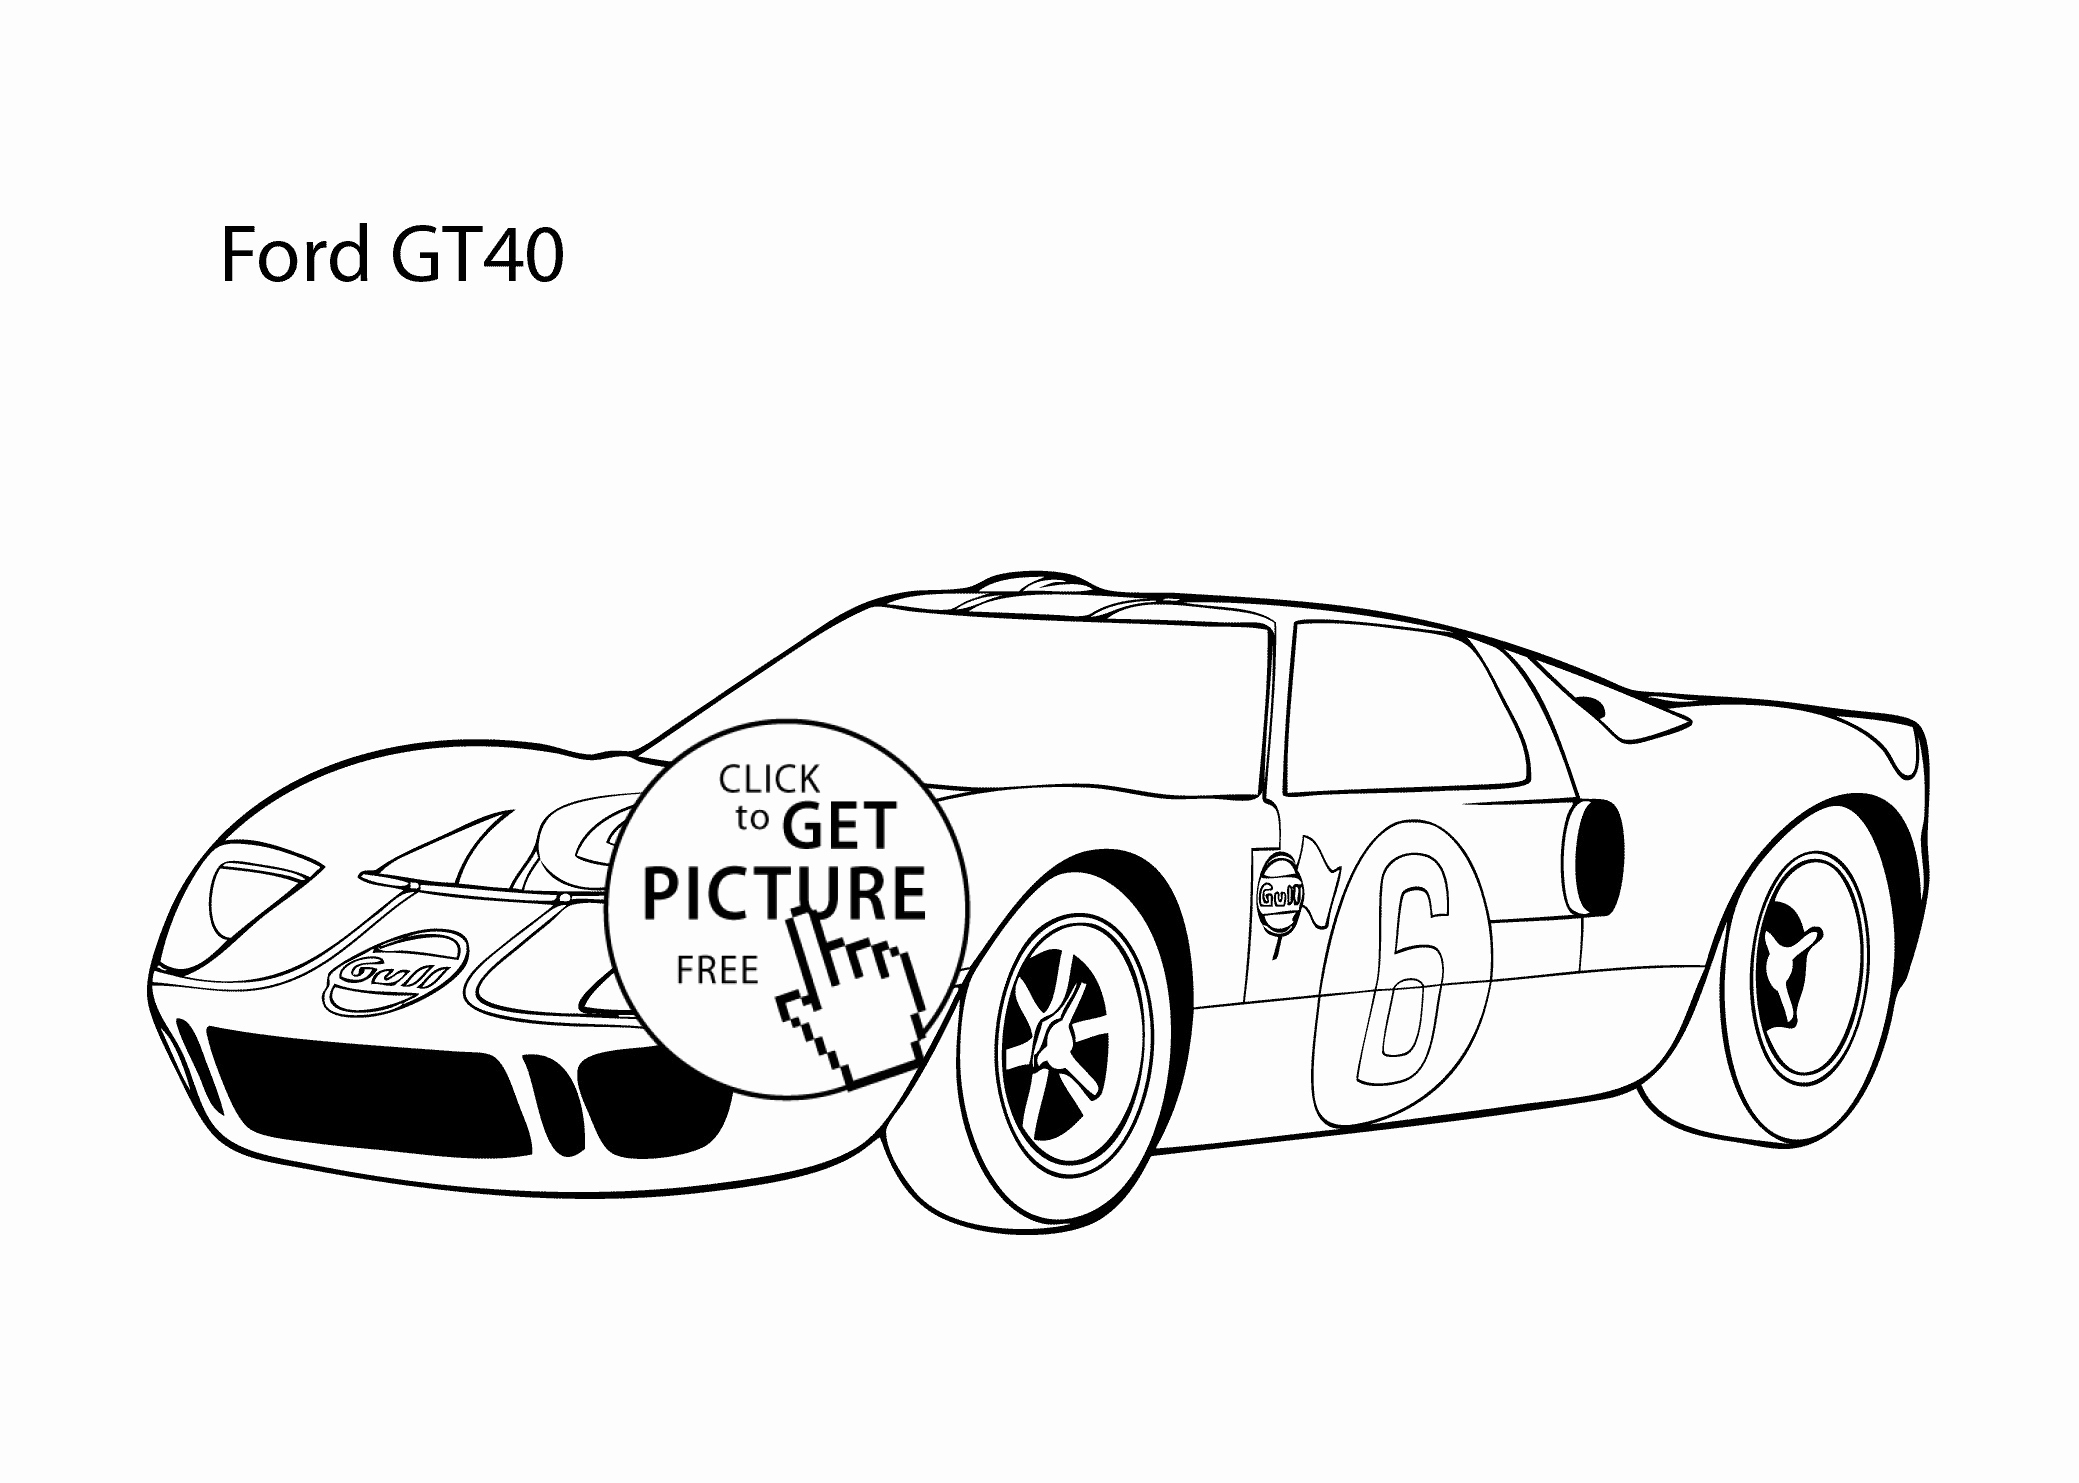 Drag Car Coloring Pages Drag Car Coloring Pages Beautiful Classic Car Coloring Pages Eitc